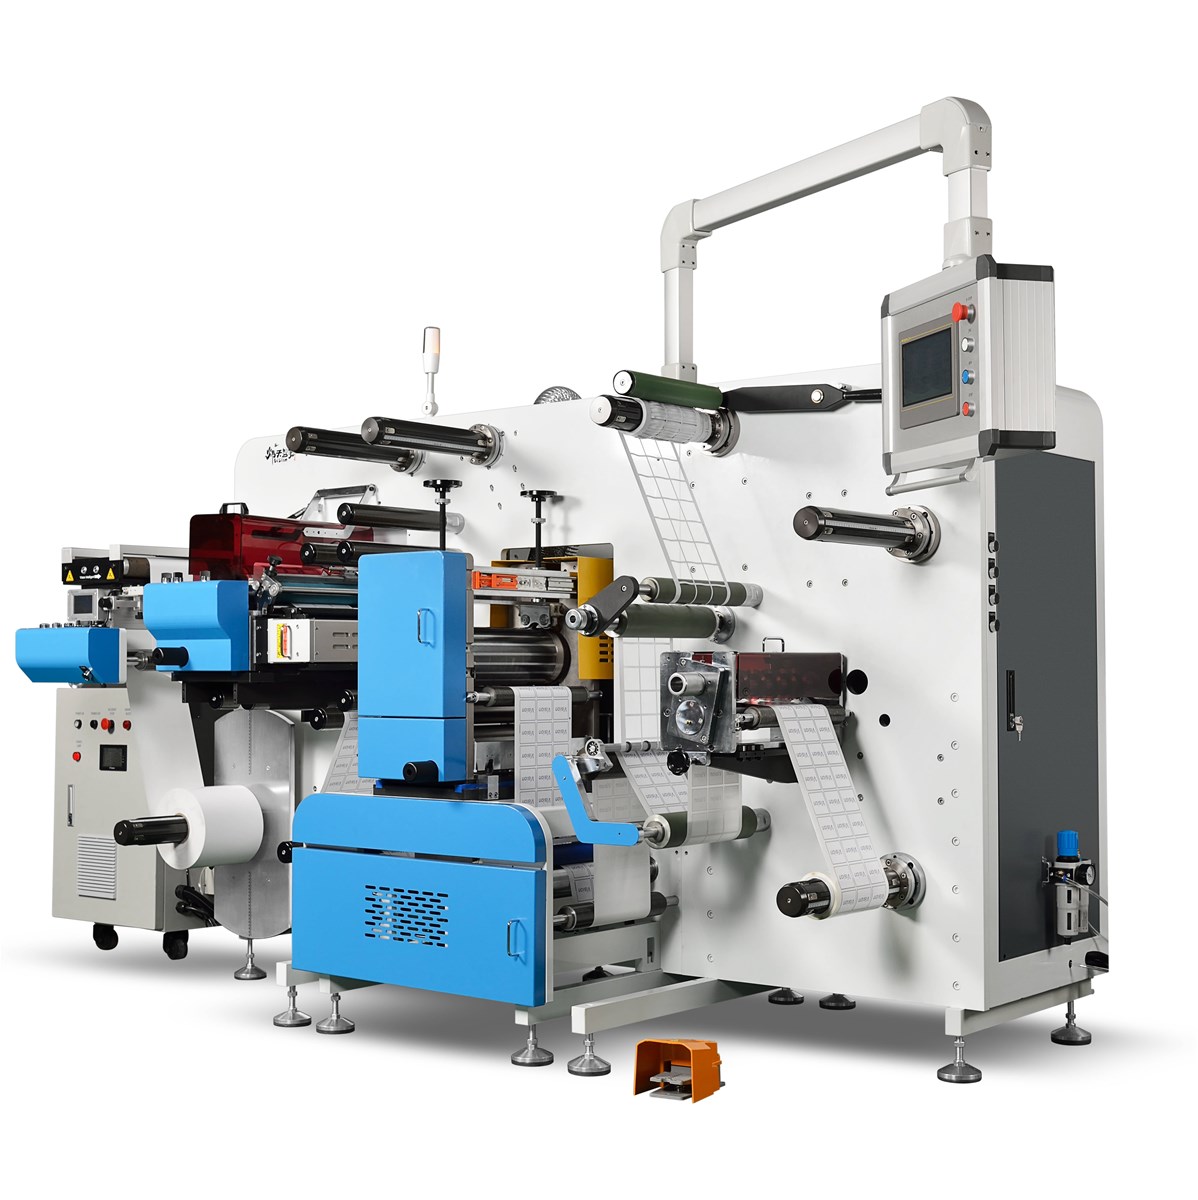 RDF330: Label Digital Finishing Machine, Die-Cutting System, Converting Equipment with Printing Function